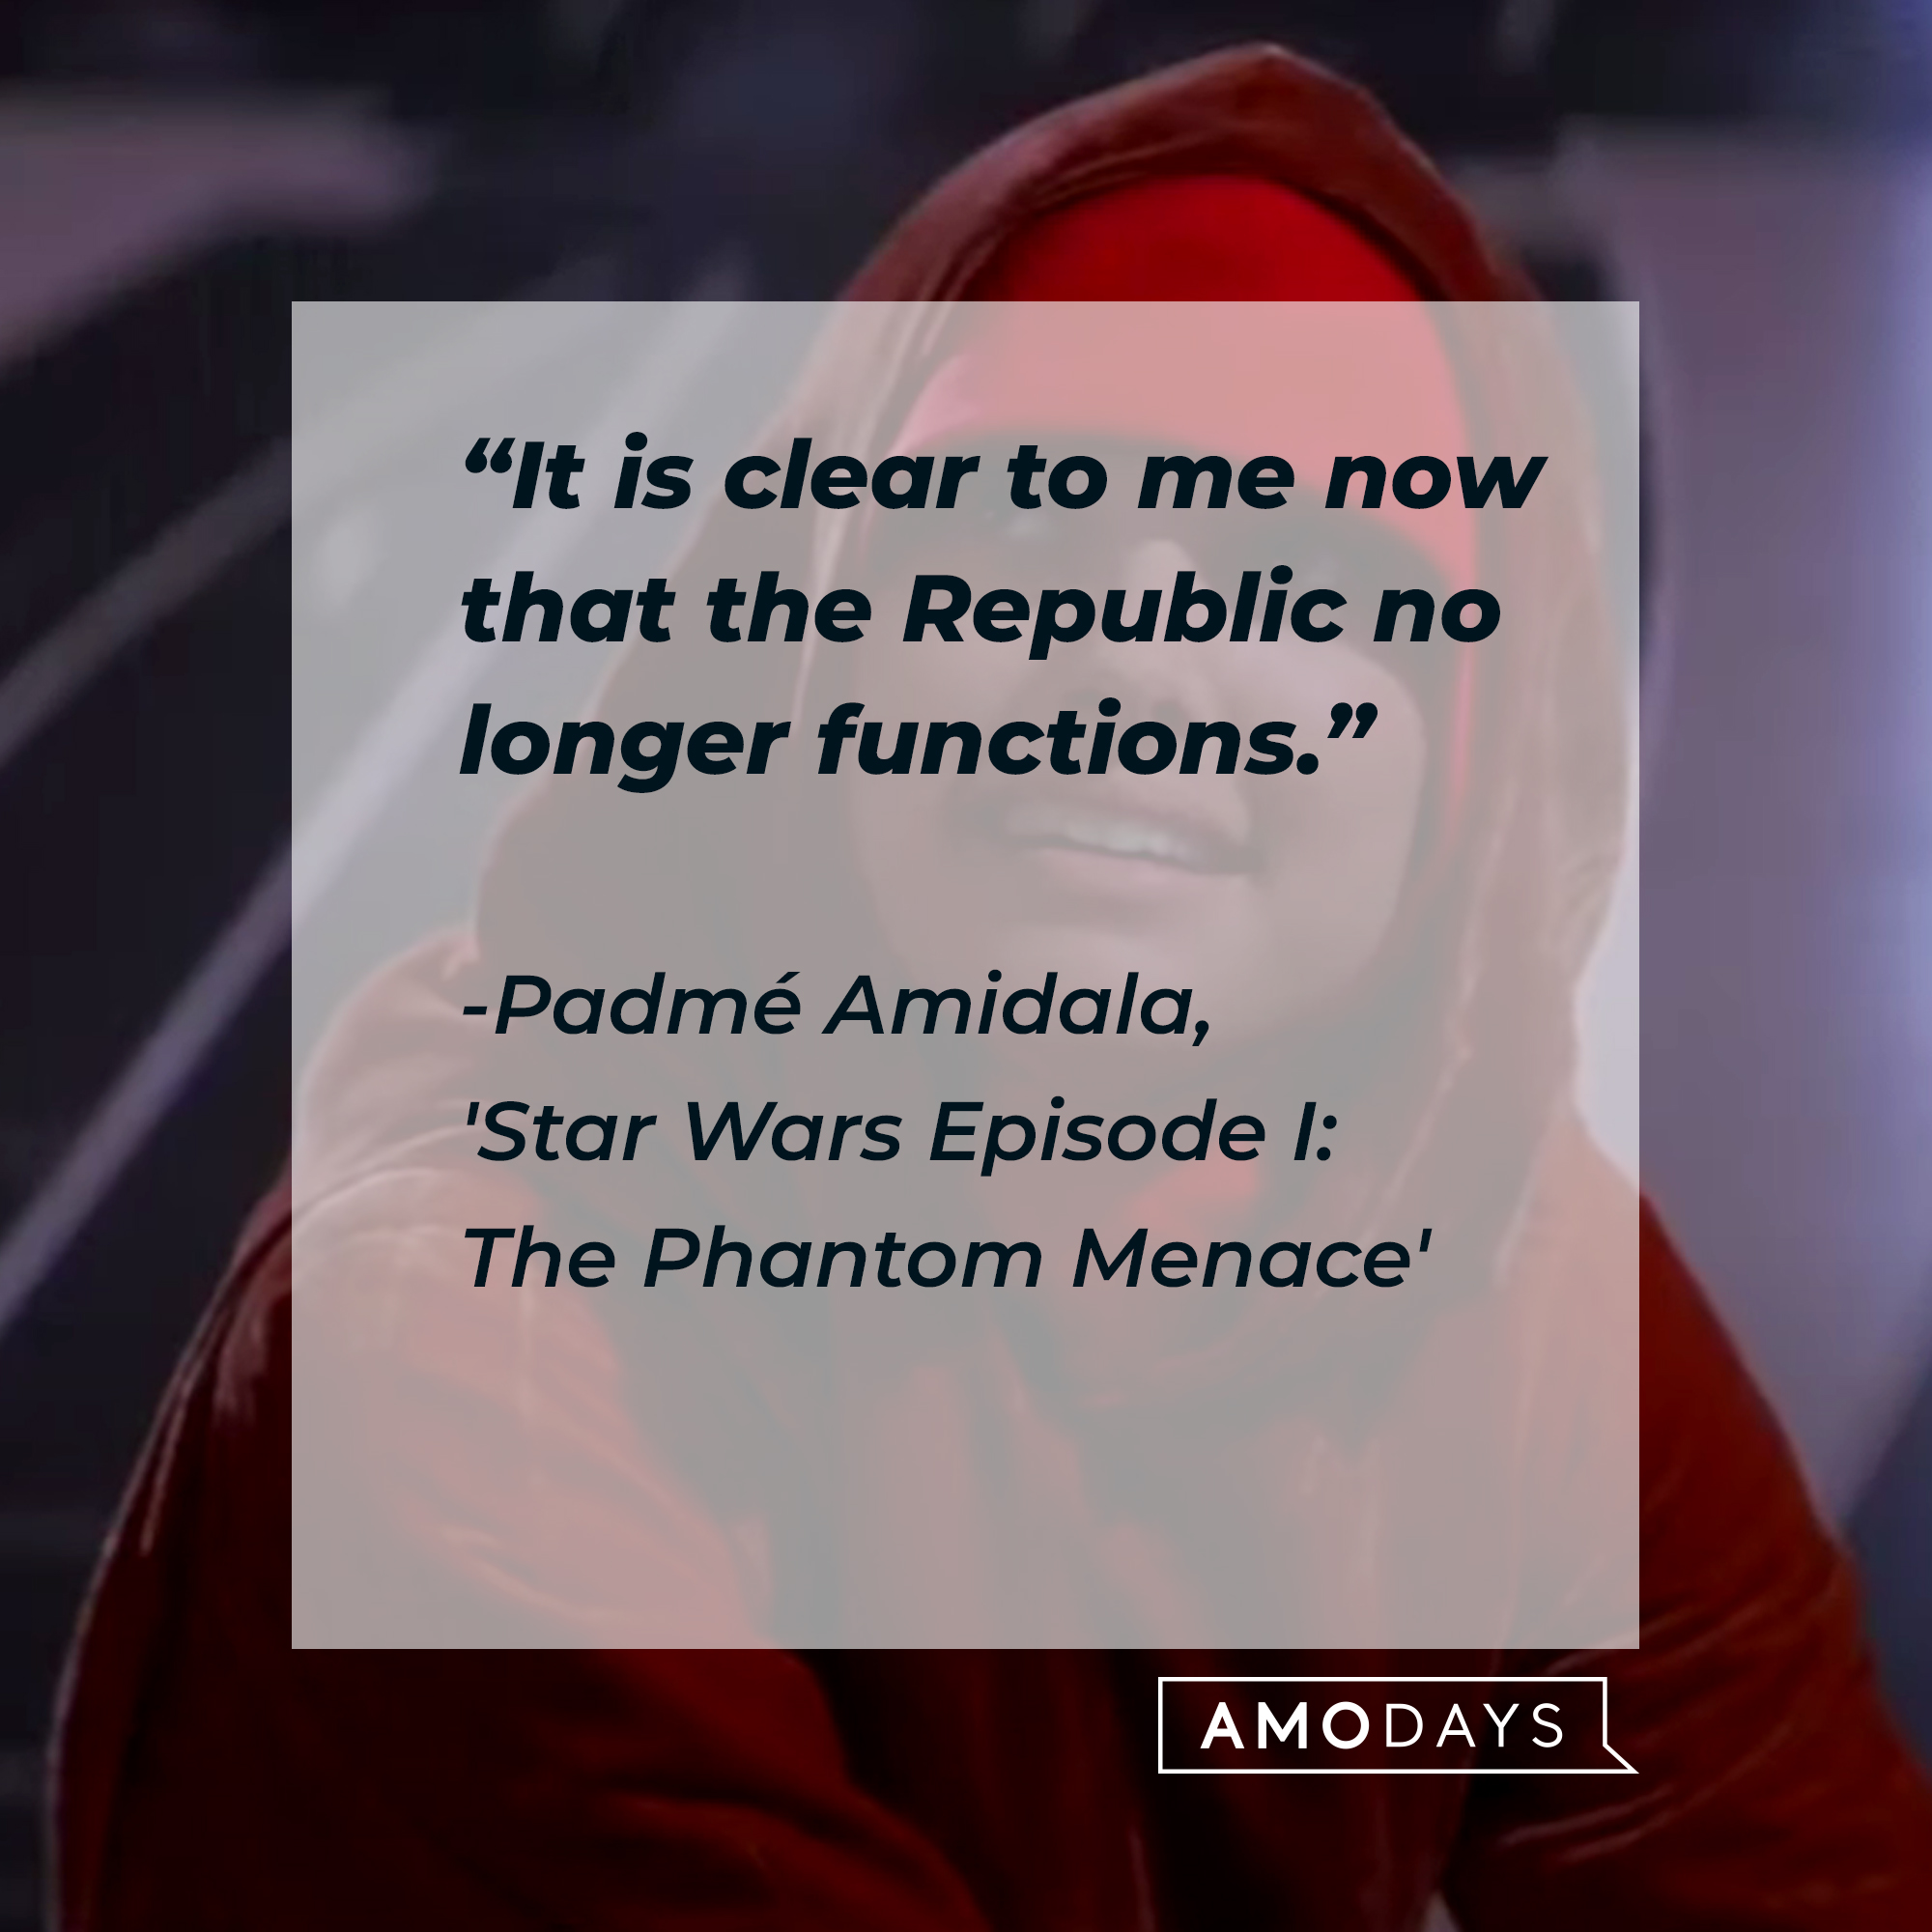 Padmé Amidala with her quote: "It is clear to me now that the Republic no longer functions." | Source: Facebook.com/StarWars